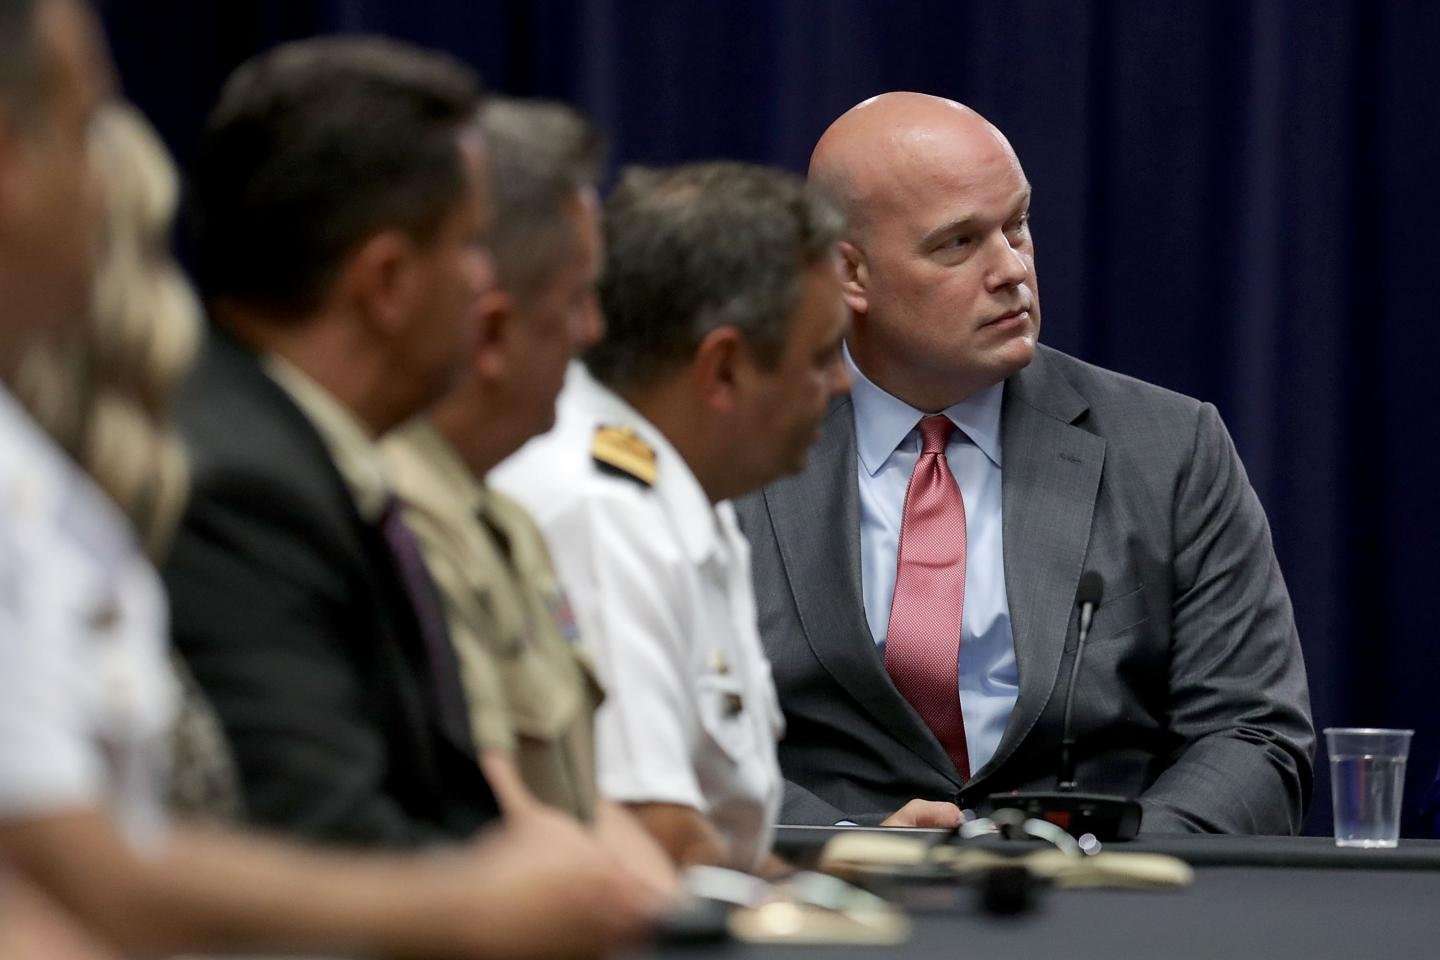 image for Acting Attorney General Matthew Whitaker Once Said Jews, Muslims and Atheists Should Not Be Federal Judges